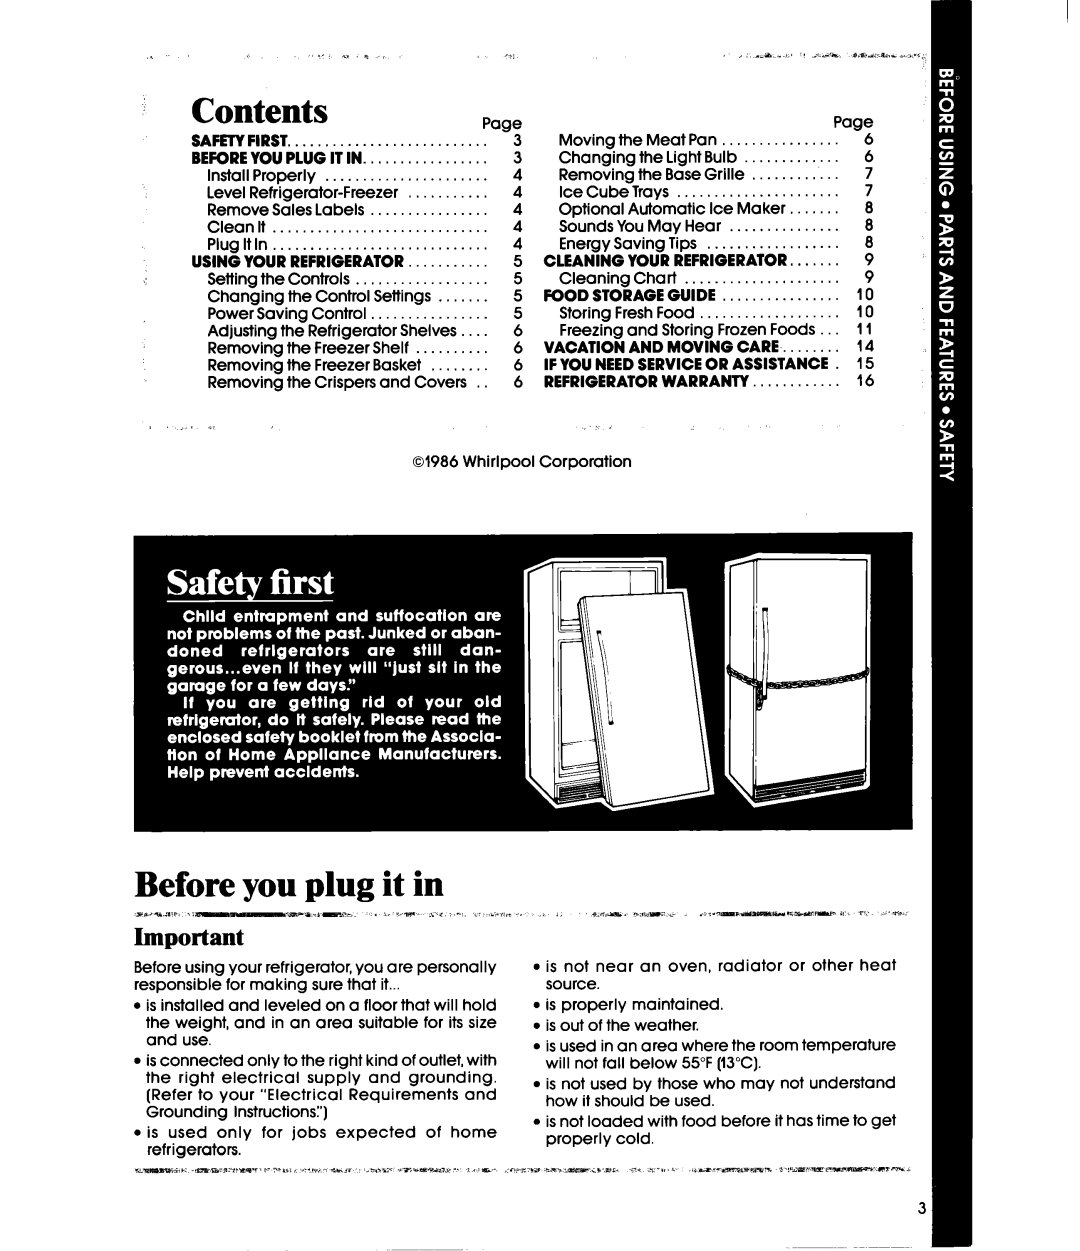 Whirlpool EBI9MK manual Contents Page, Before you plug it in 